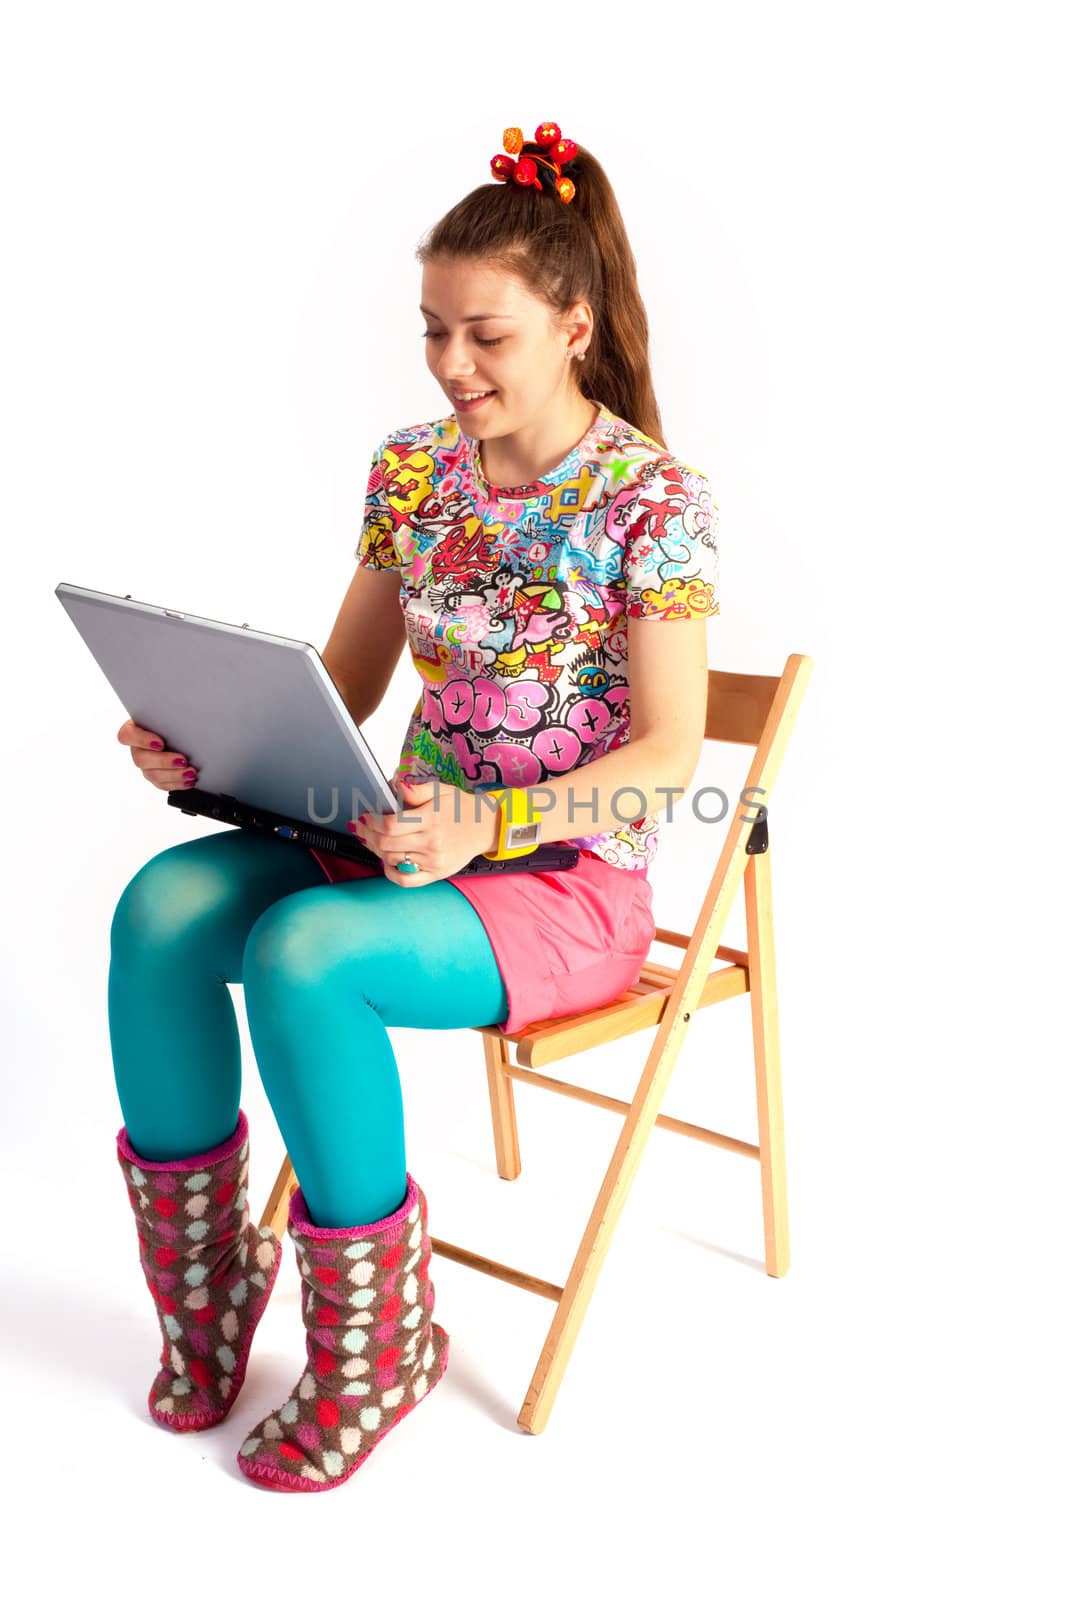 people series: young woman with notebook on chair